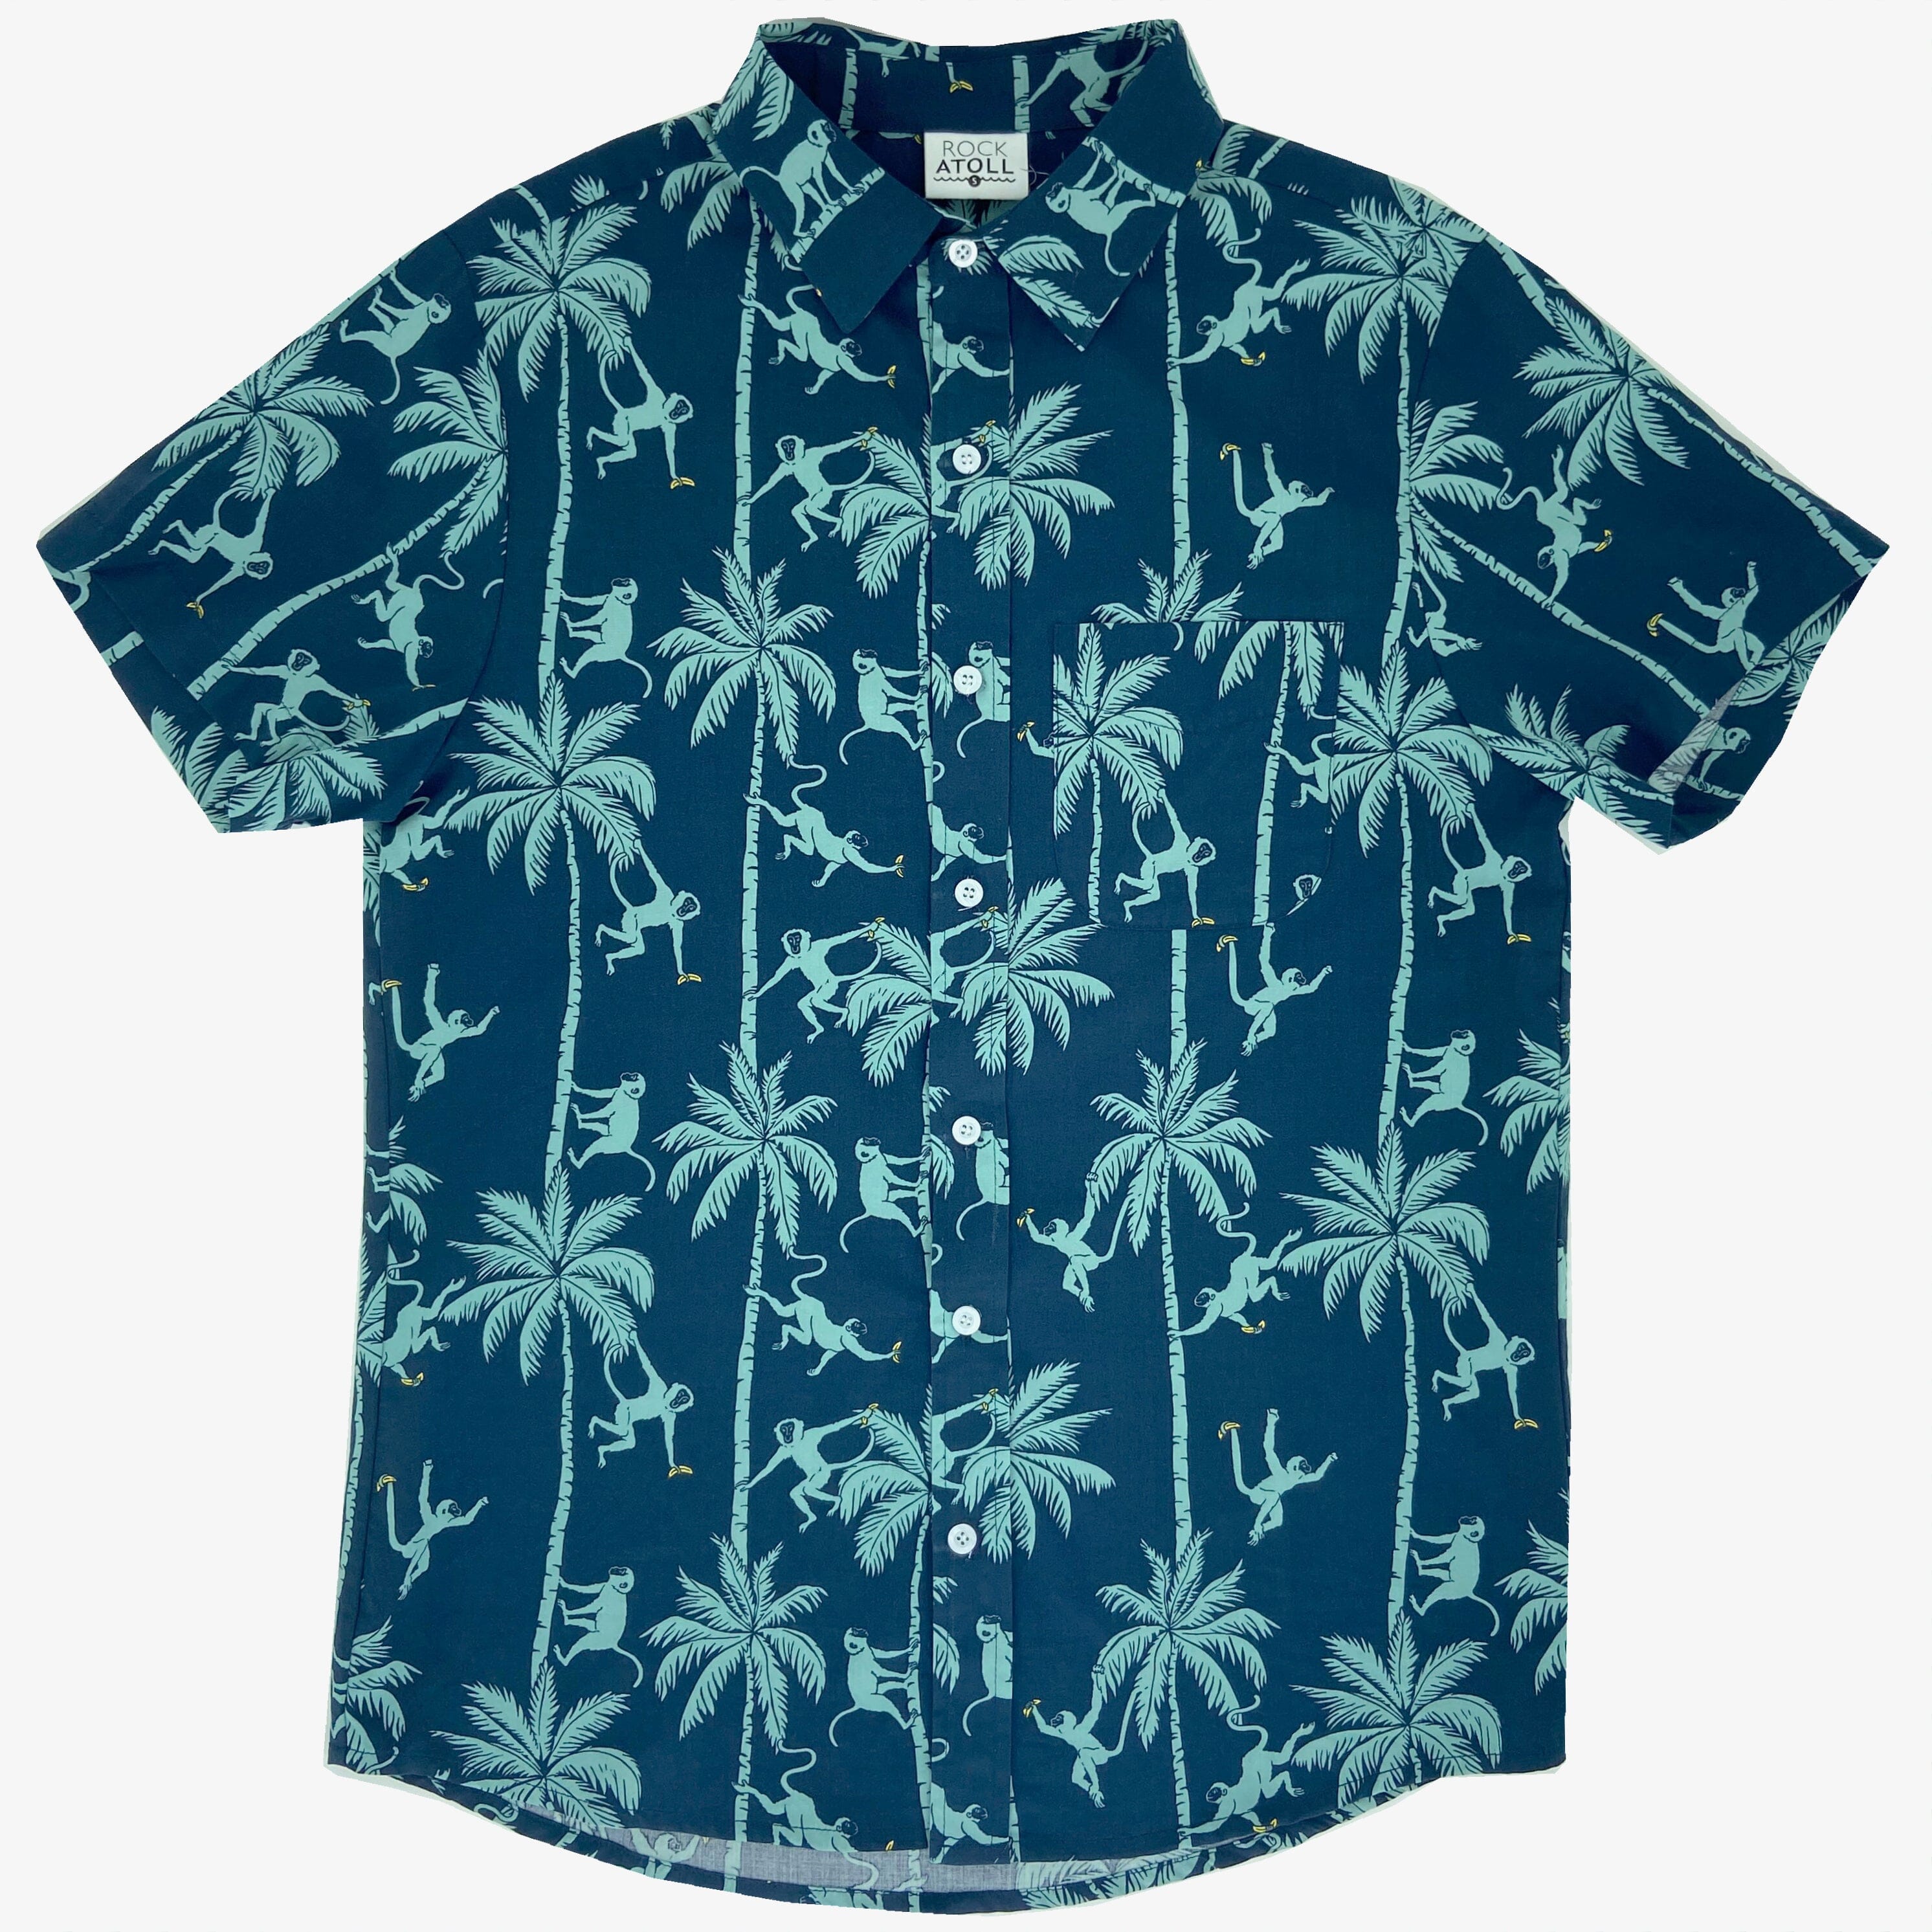 Buy Men's Short Sleeve Button Down Hawaiian Shirts with Monkey All Over Print